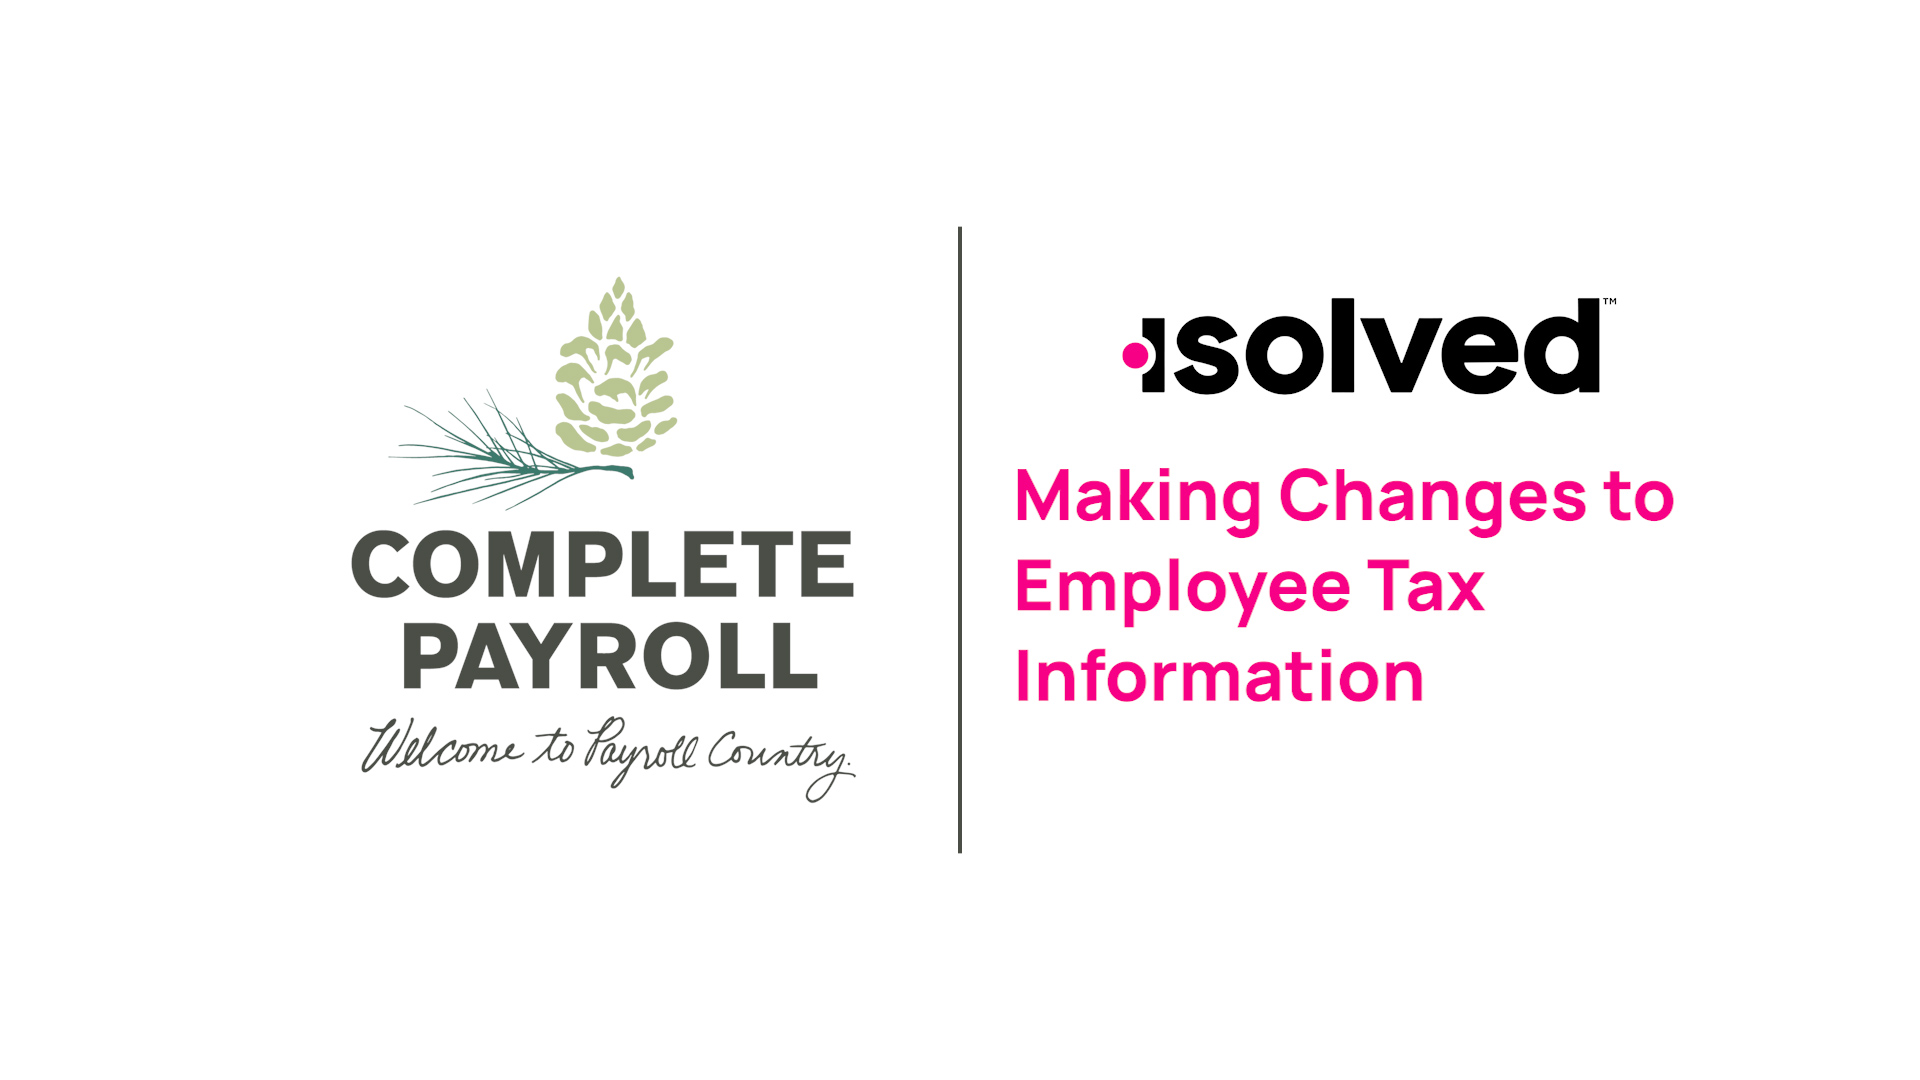 Making Changes to Employee Tax Information